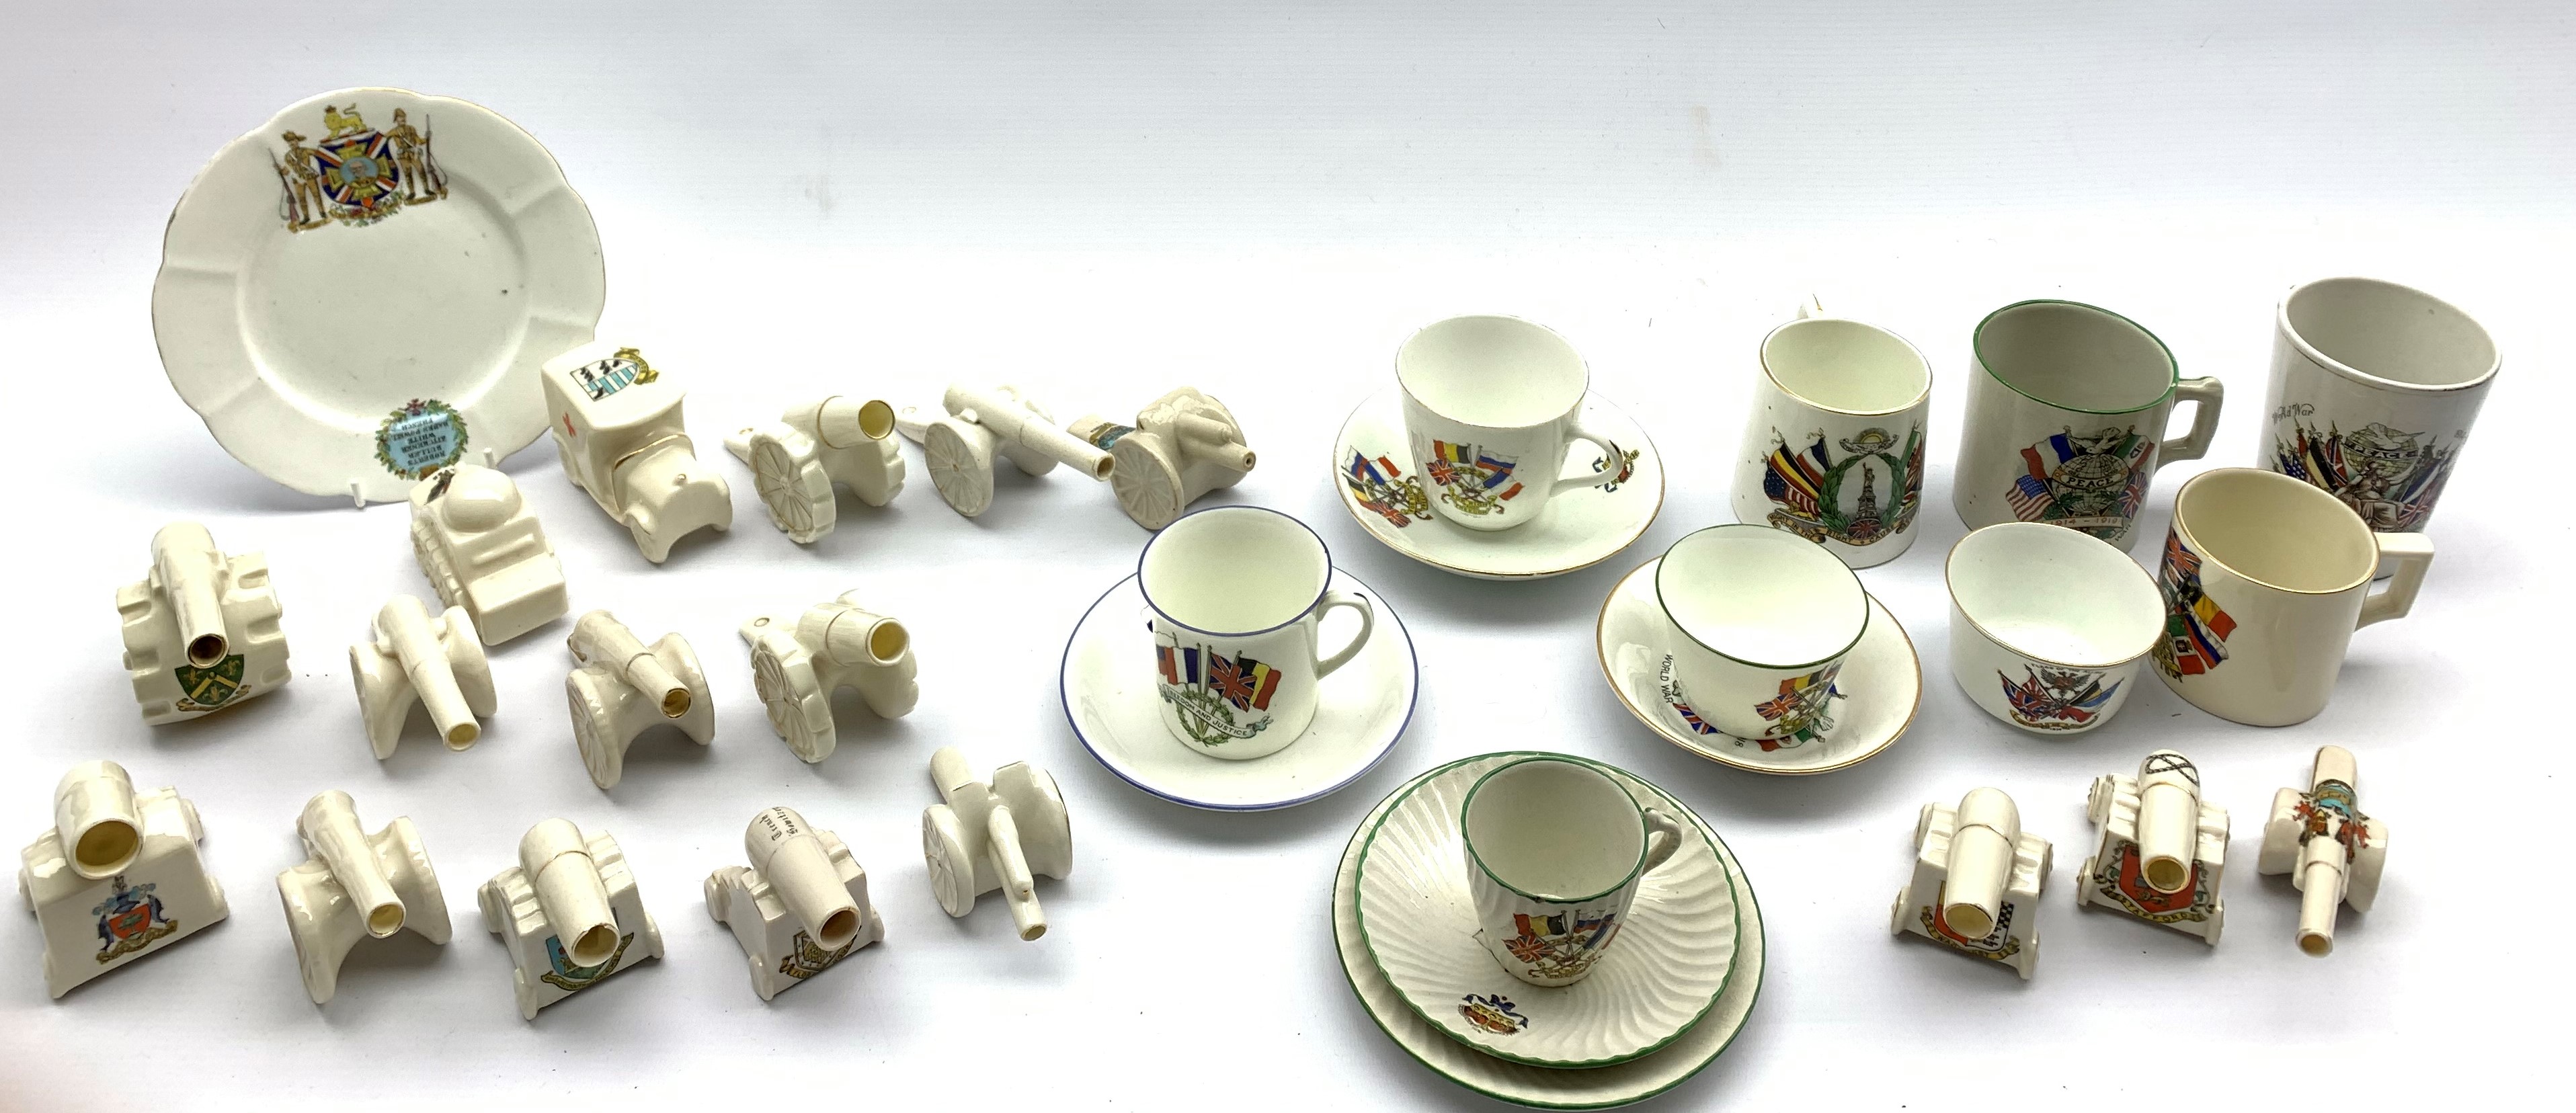 Predominantly WWI crested china by various makers including Heathcote China, W.H.